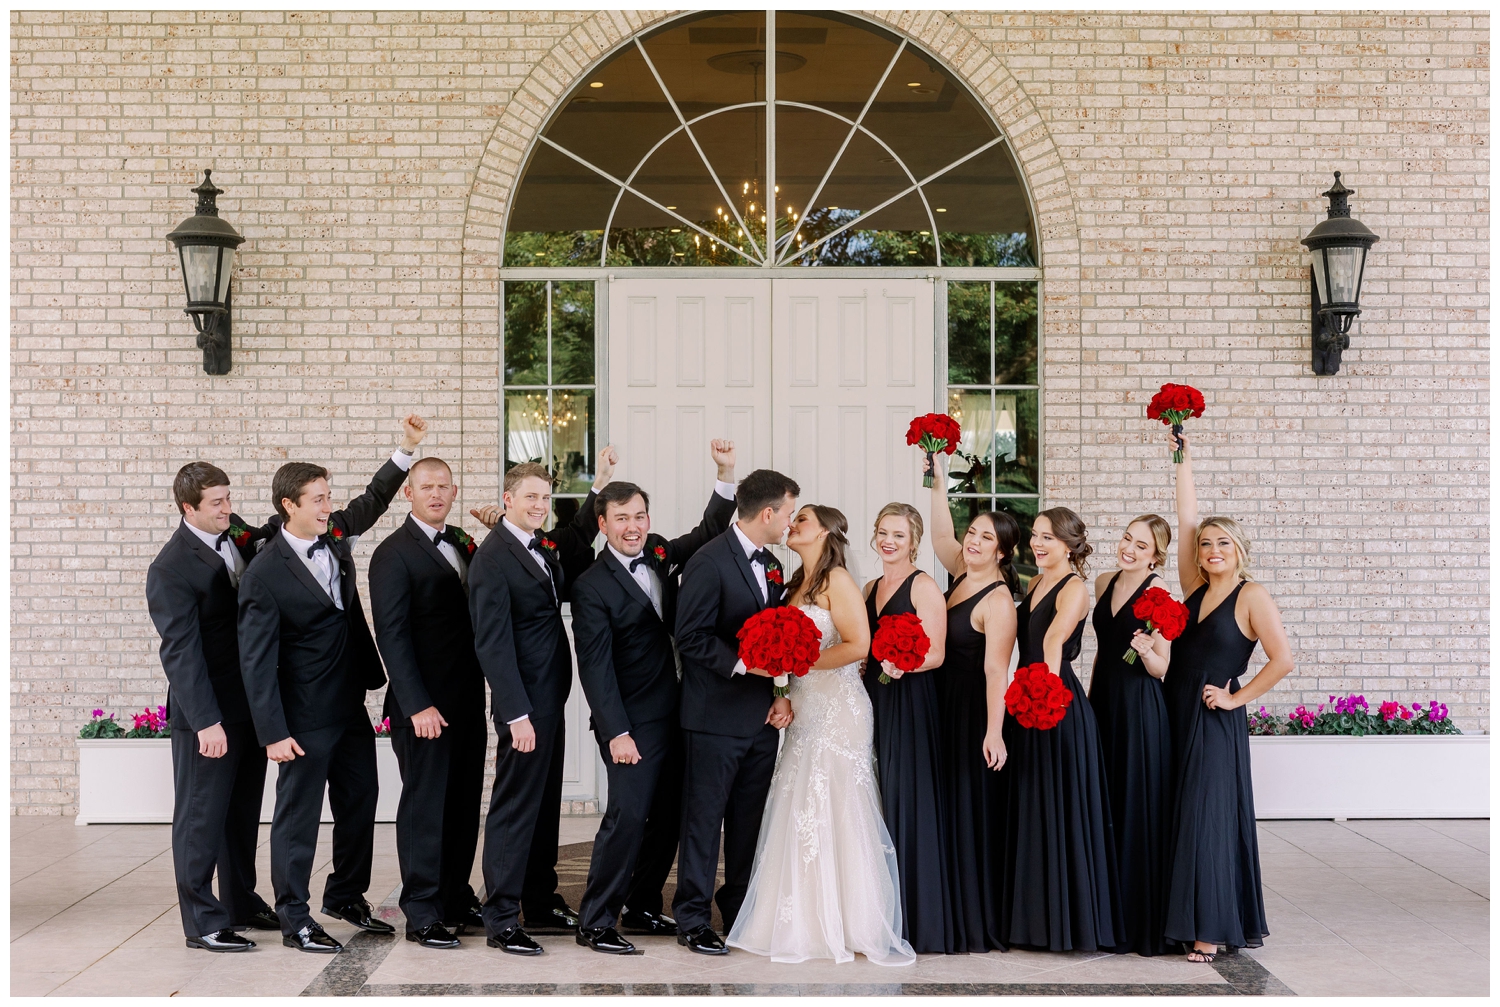 bridal party in black dresses and black tuxes celebrating outside Sugar Creek Country Club wedding